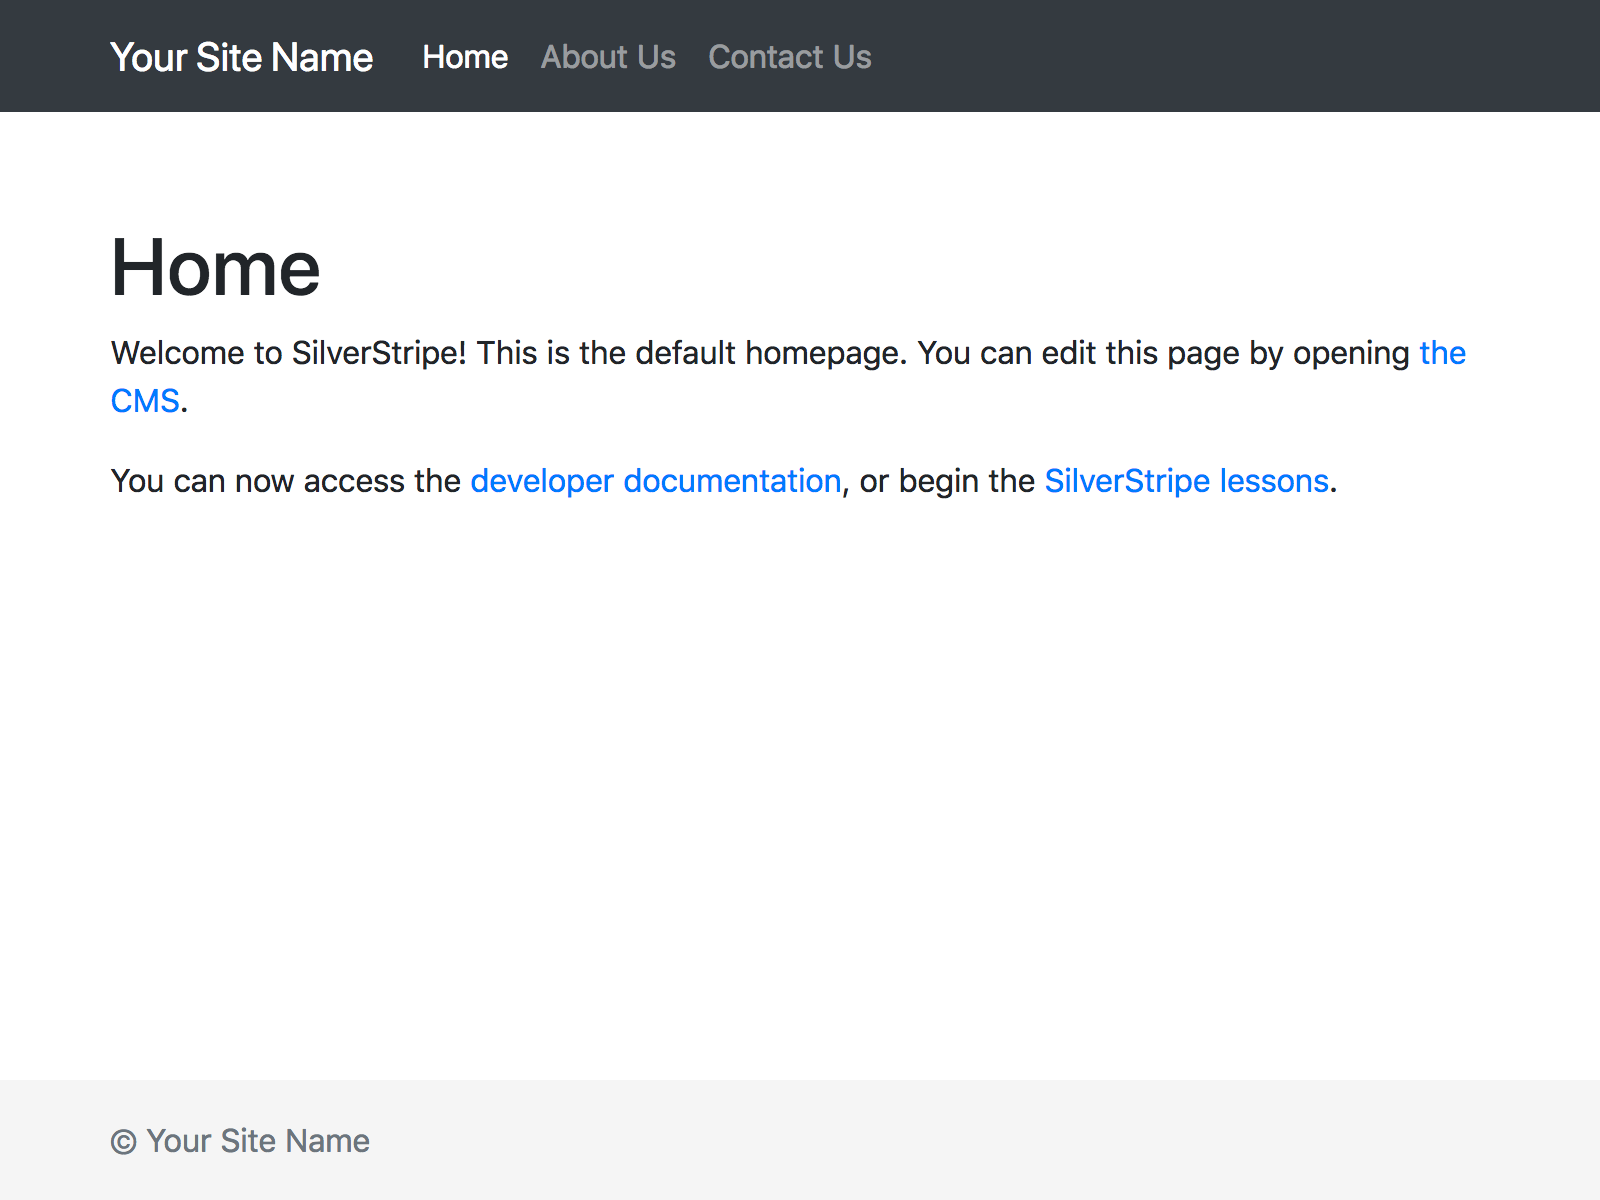 Bootstrap 4.5.2 theme for SilverStripe 4